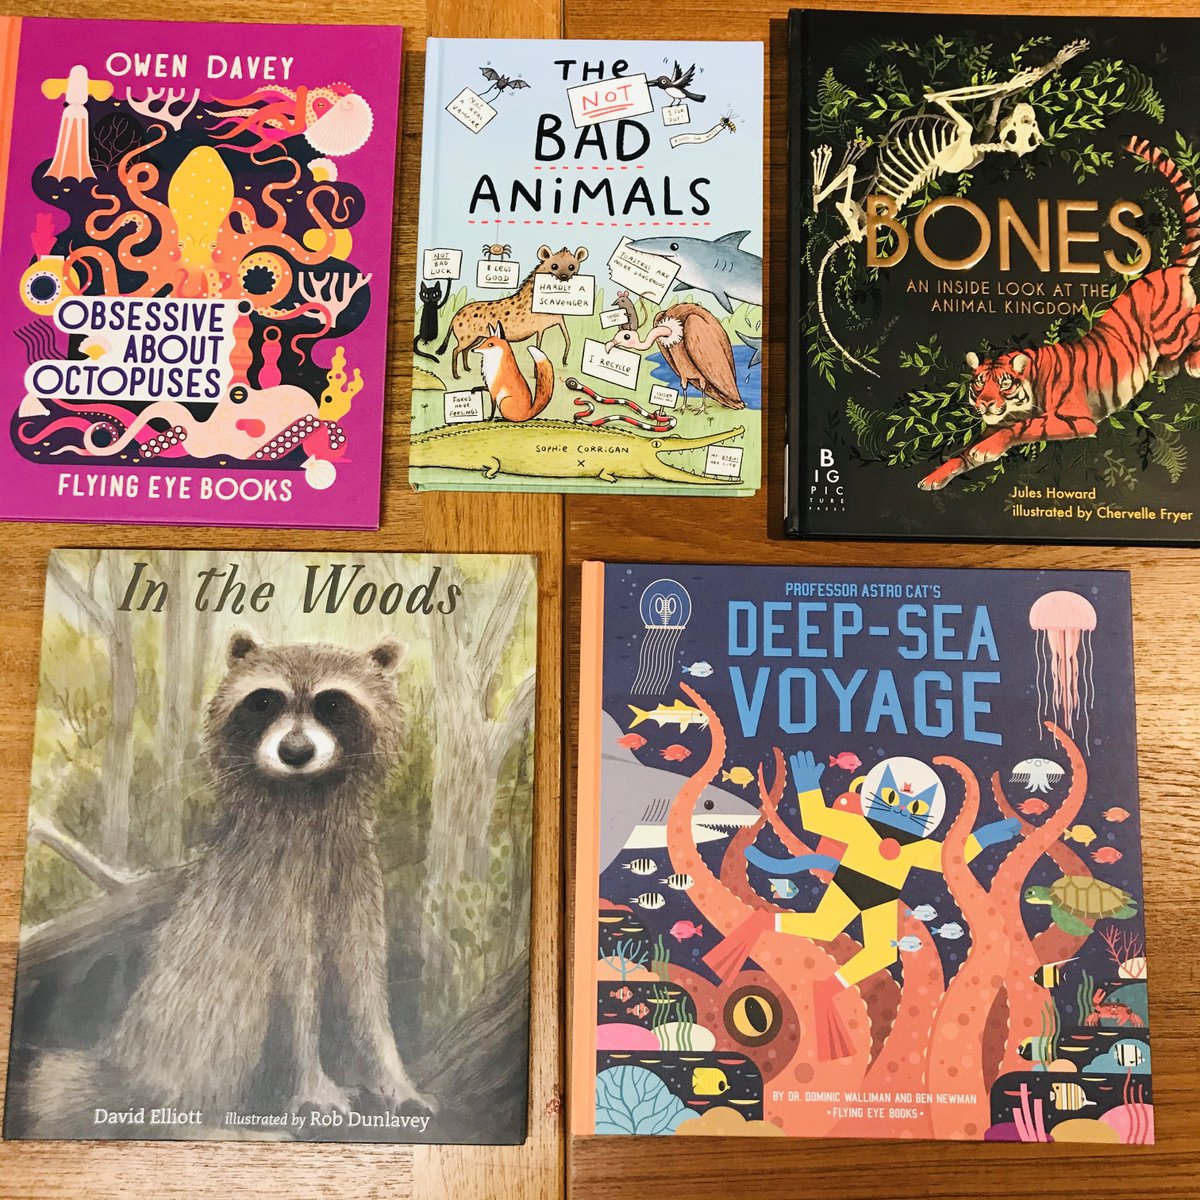 OBSESSIVE ABOUT OCTOPUSES by  @owendaveydraws!IN THE WOODS by David Elliott, illus Rob Dunlavey!THE NOT BAD ANIMALS by  @SophieMCorrigan!PROF. ASTRO CAT'S DEEP-SEA VOYAGE by Dr. Dominic Walliman &  @bennewmanillo!BONES by  @juleslhoward, illus Chervelle Fryer!